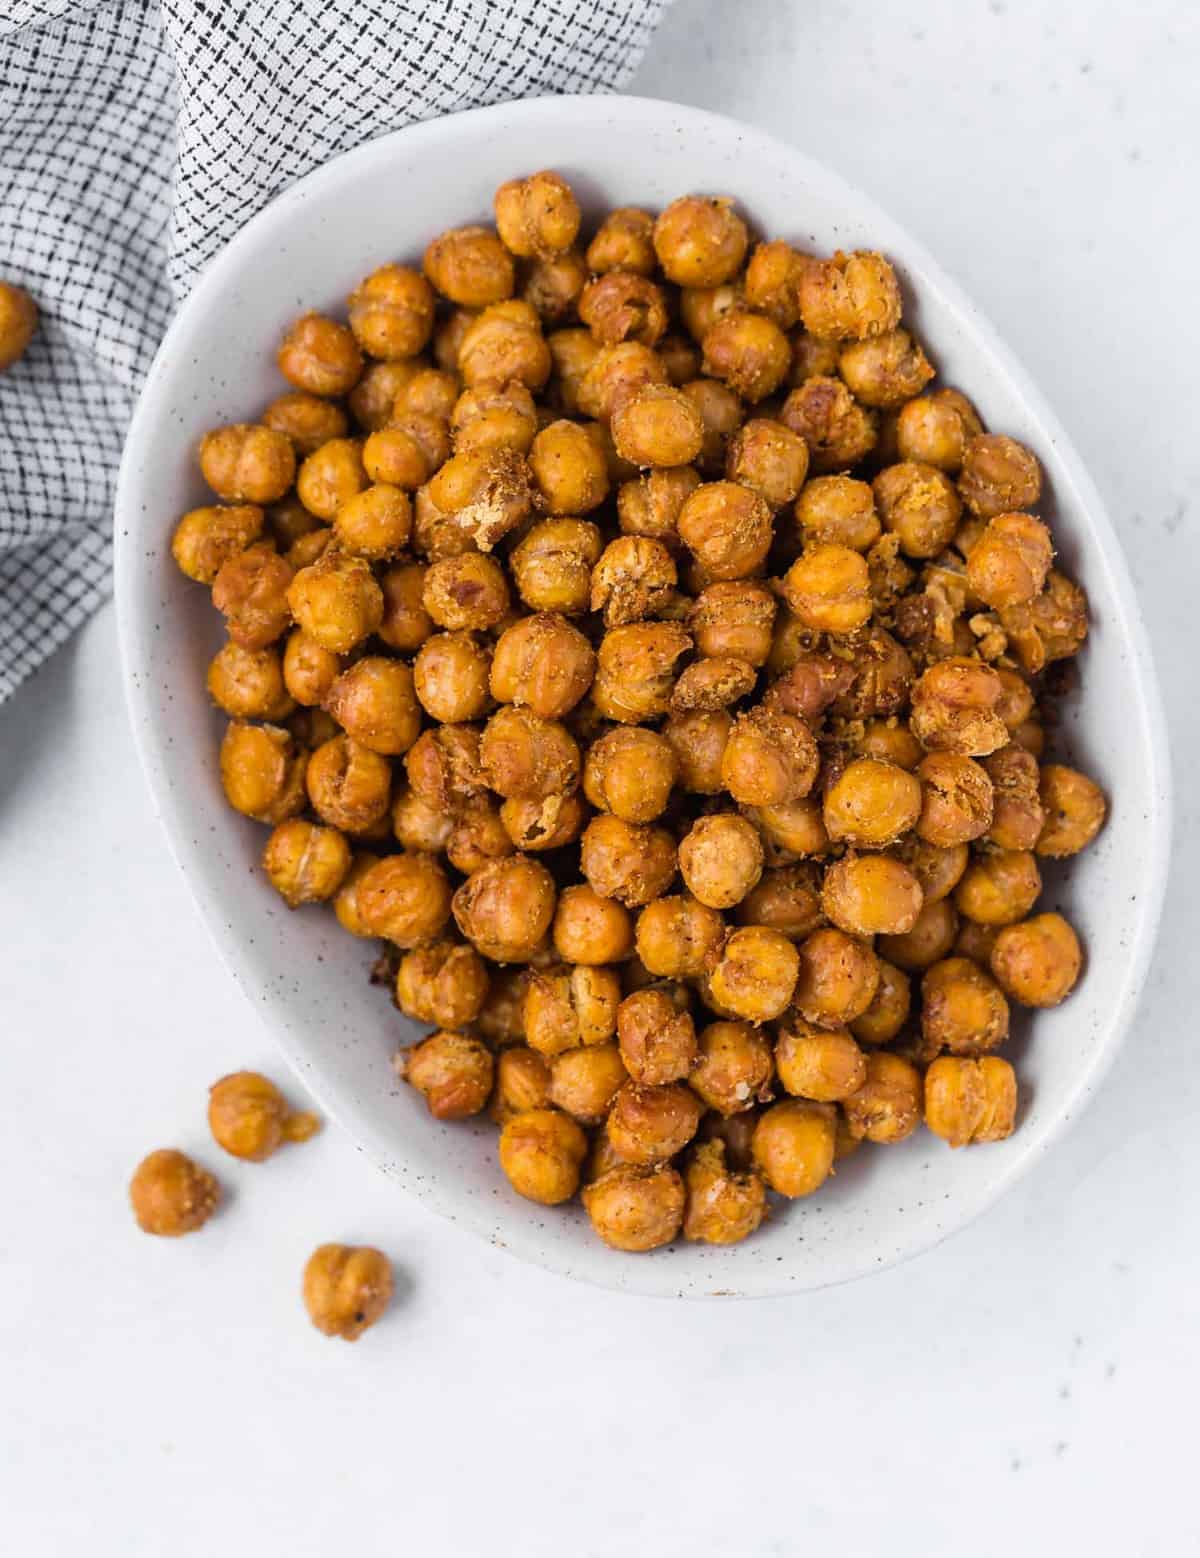 Overhead view of a white bowl filled to the brim with golden-brown fried chickpeas.